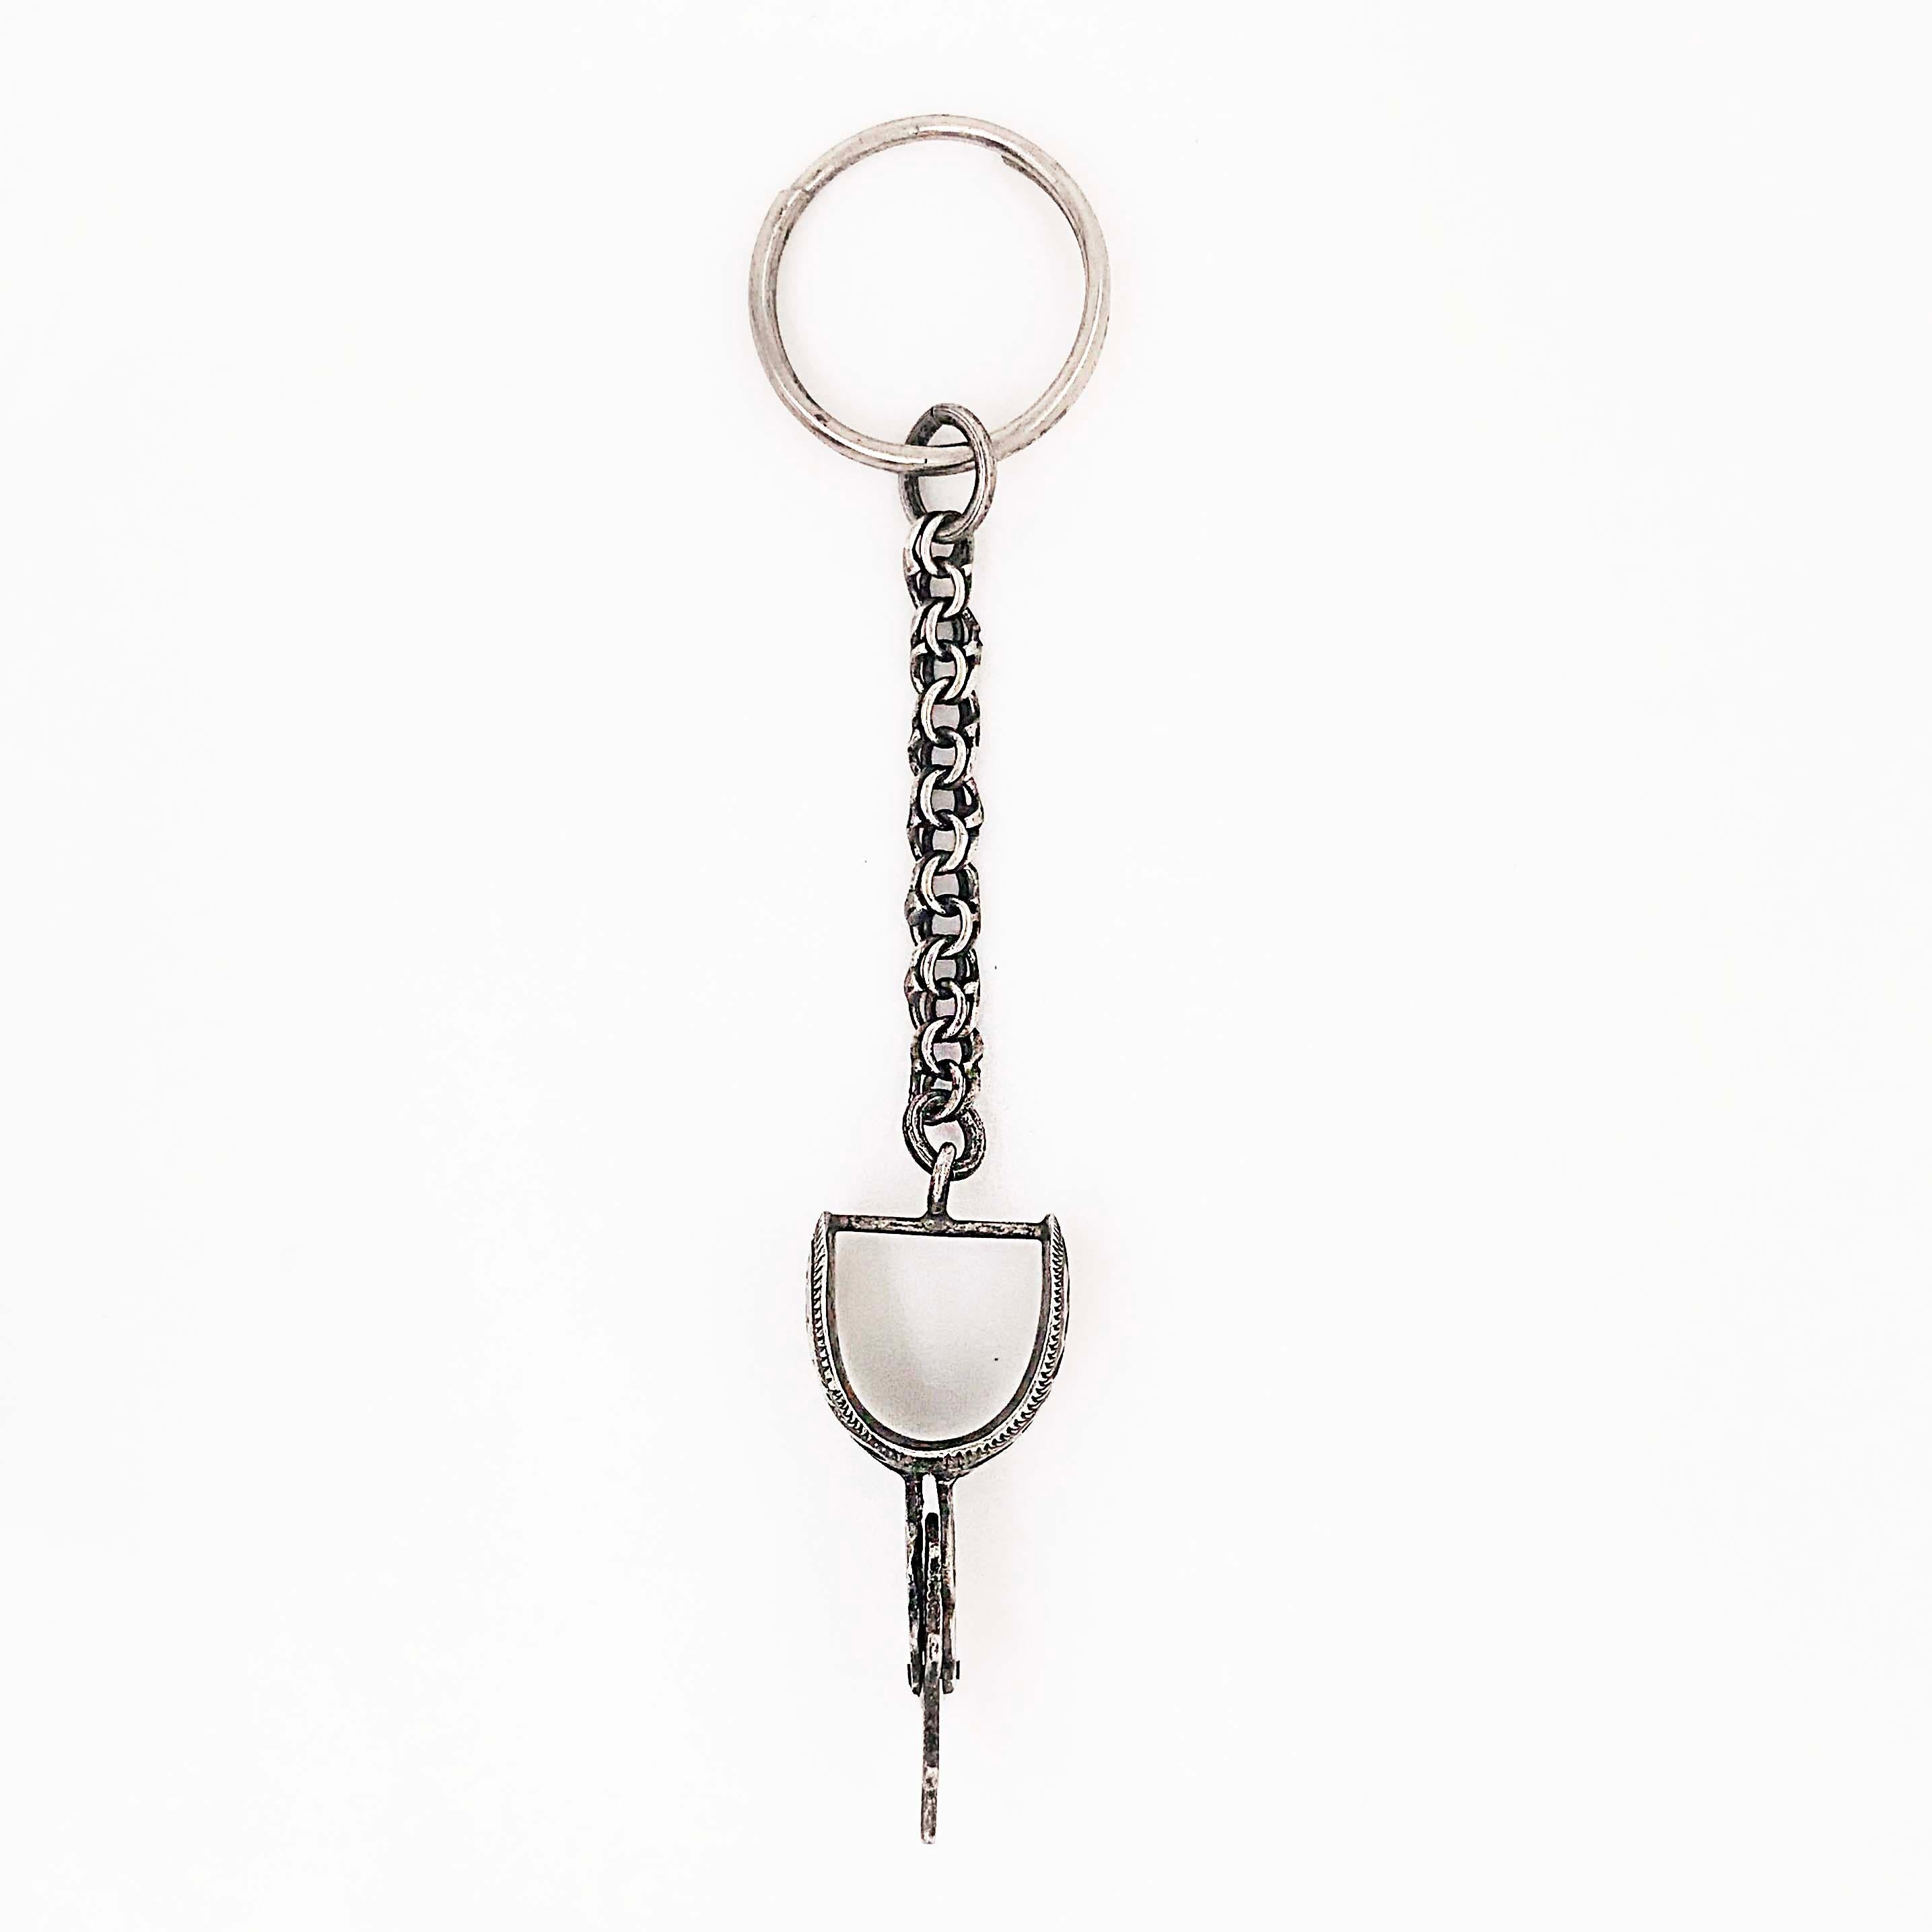 The sterling cowboy keychain is a hand fabricated estate piece. The keychain has a cowboy spur that has been handmade with intricate hand engraving detail work! The keychain is sterling silver with an oxidized finish that gives the piece a wester